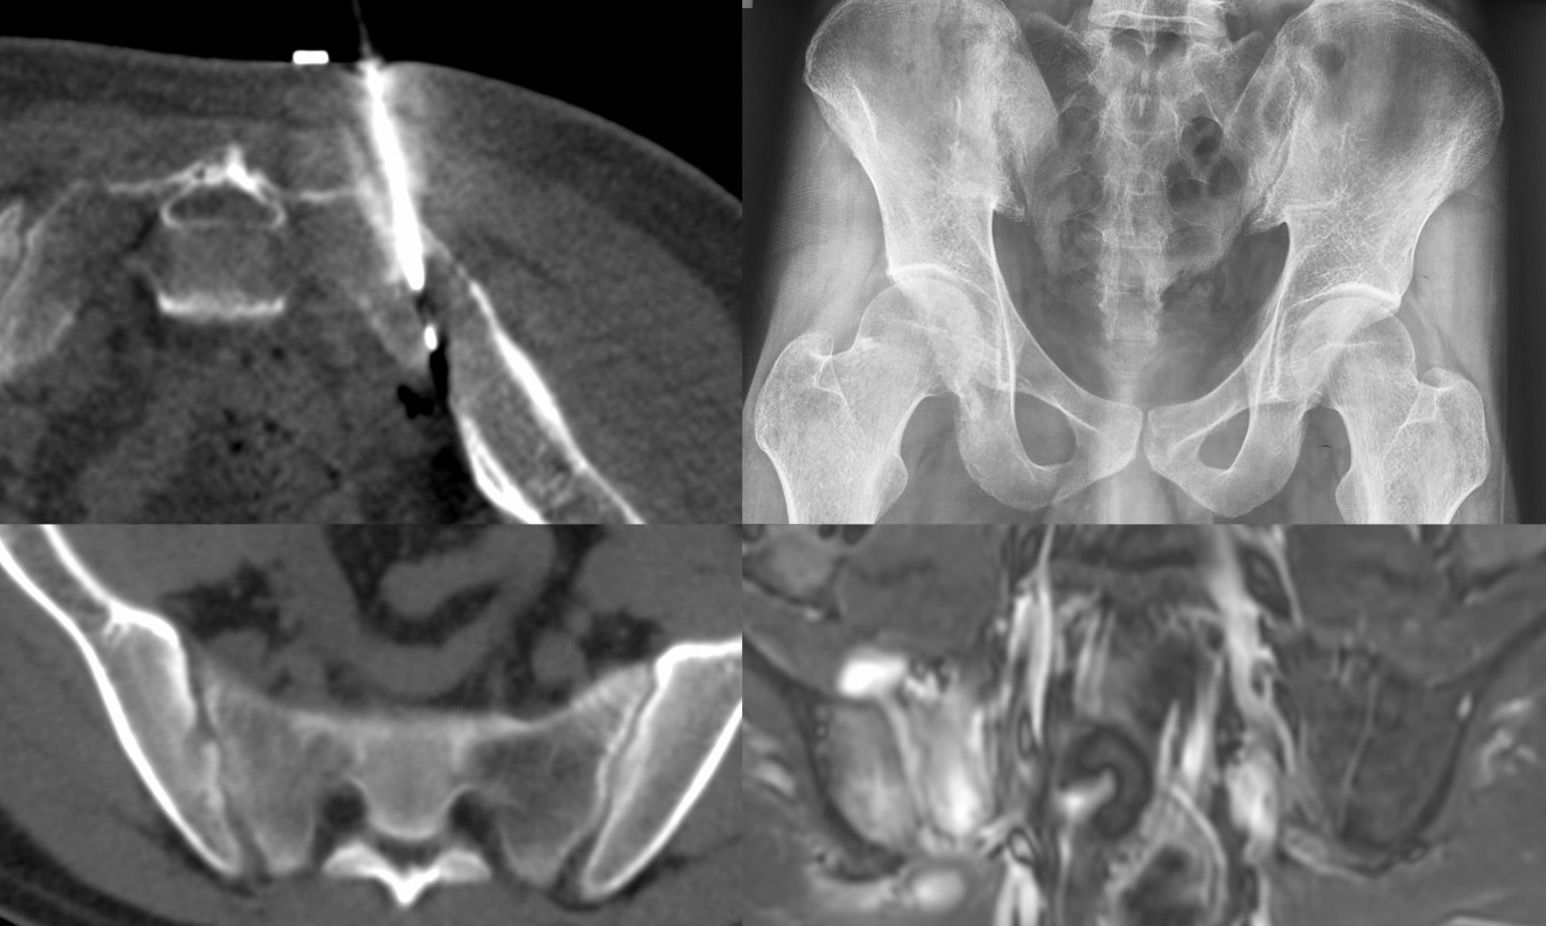 Case 61: Sacroiliac Joint Biopsy in Mild to Moderate Sacroilitis